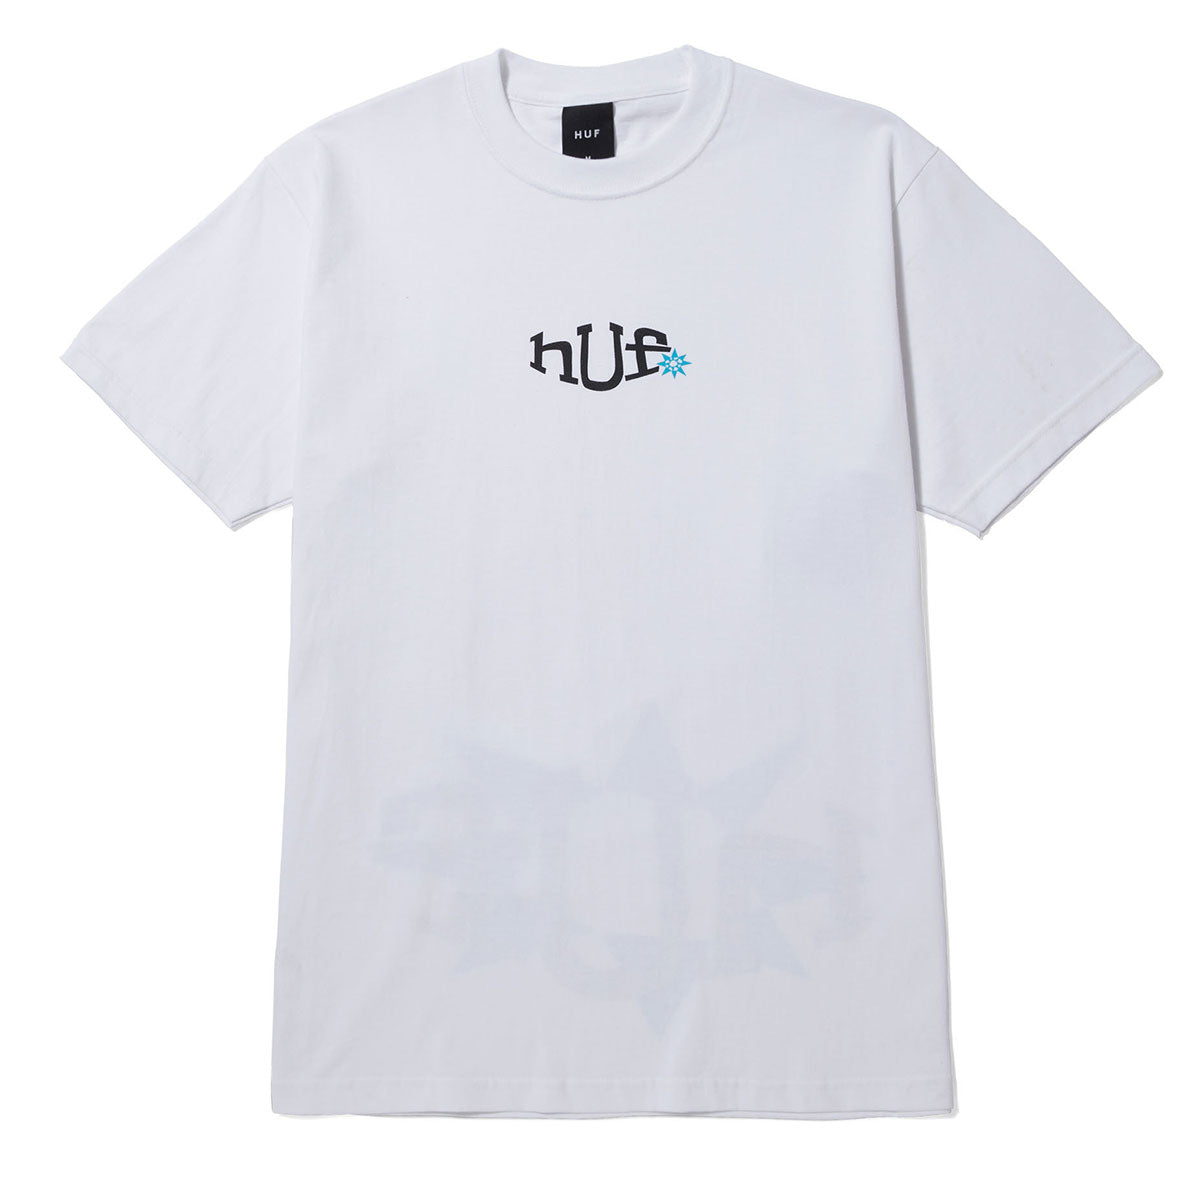 HUF Jazzy Grooves T-Shirt - White image 2